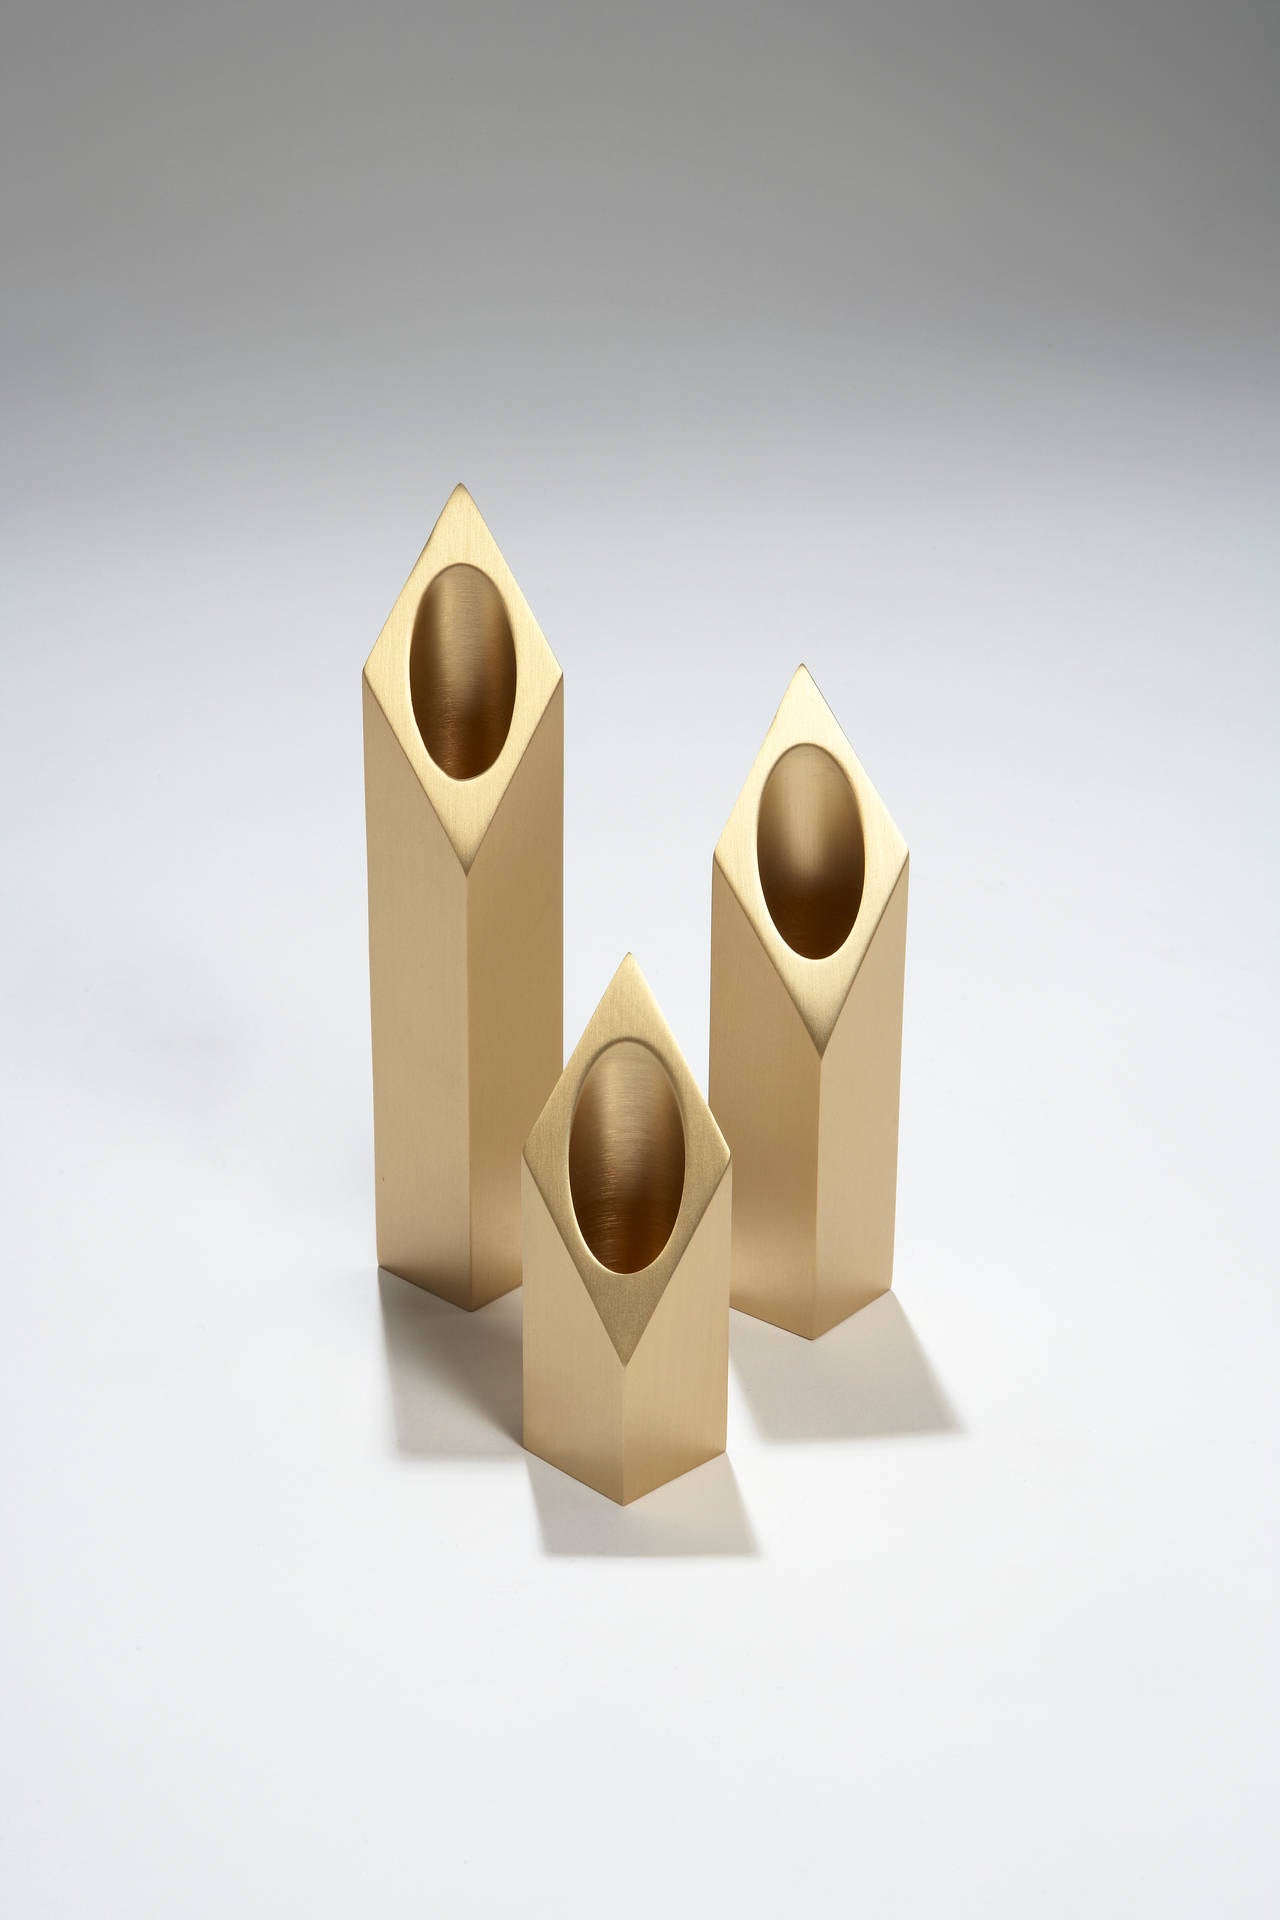 Cast brass
H : 18 / 14 / 10 cm
H : 7.5 / 5.5 / 3.9 inches
Capsule collection
Limited edition of 20

Interior designer and architect Hervé Langlais creates furniture with the purest of lines. His designs are enhanced by the elegance and